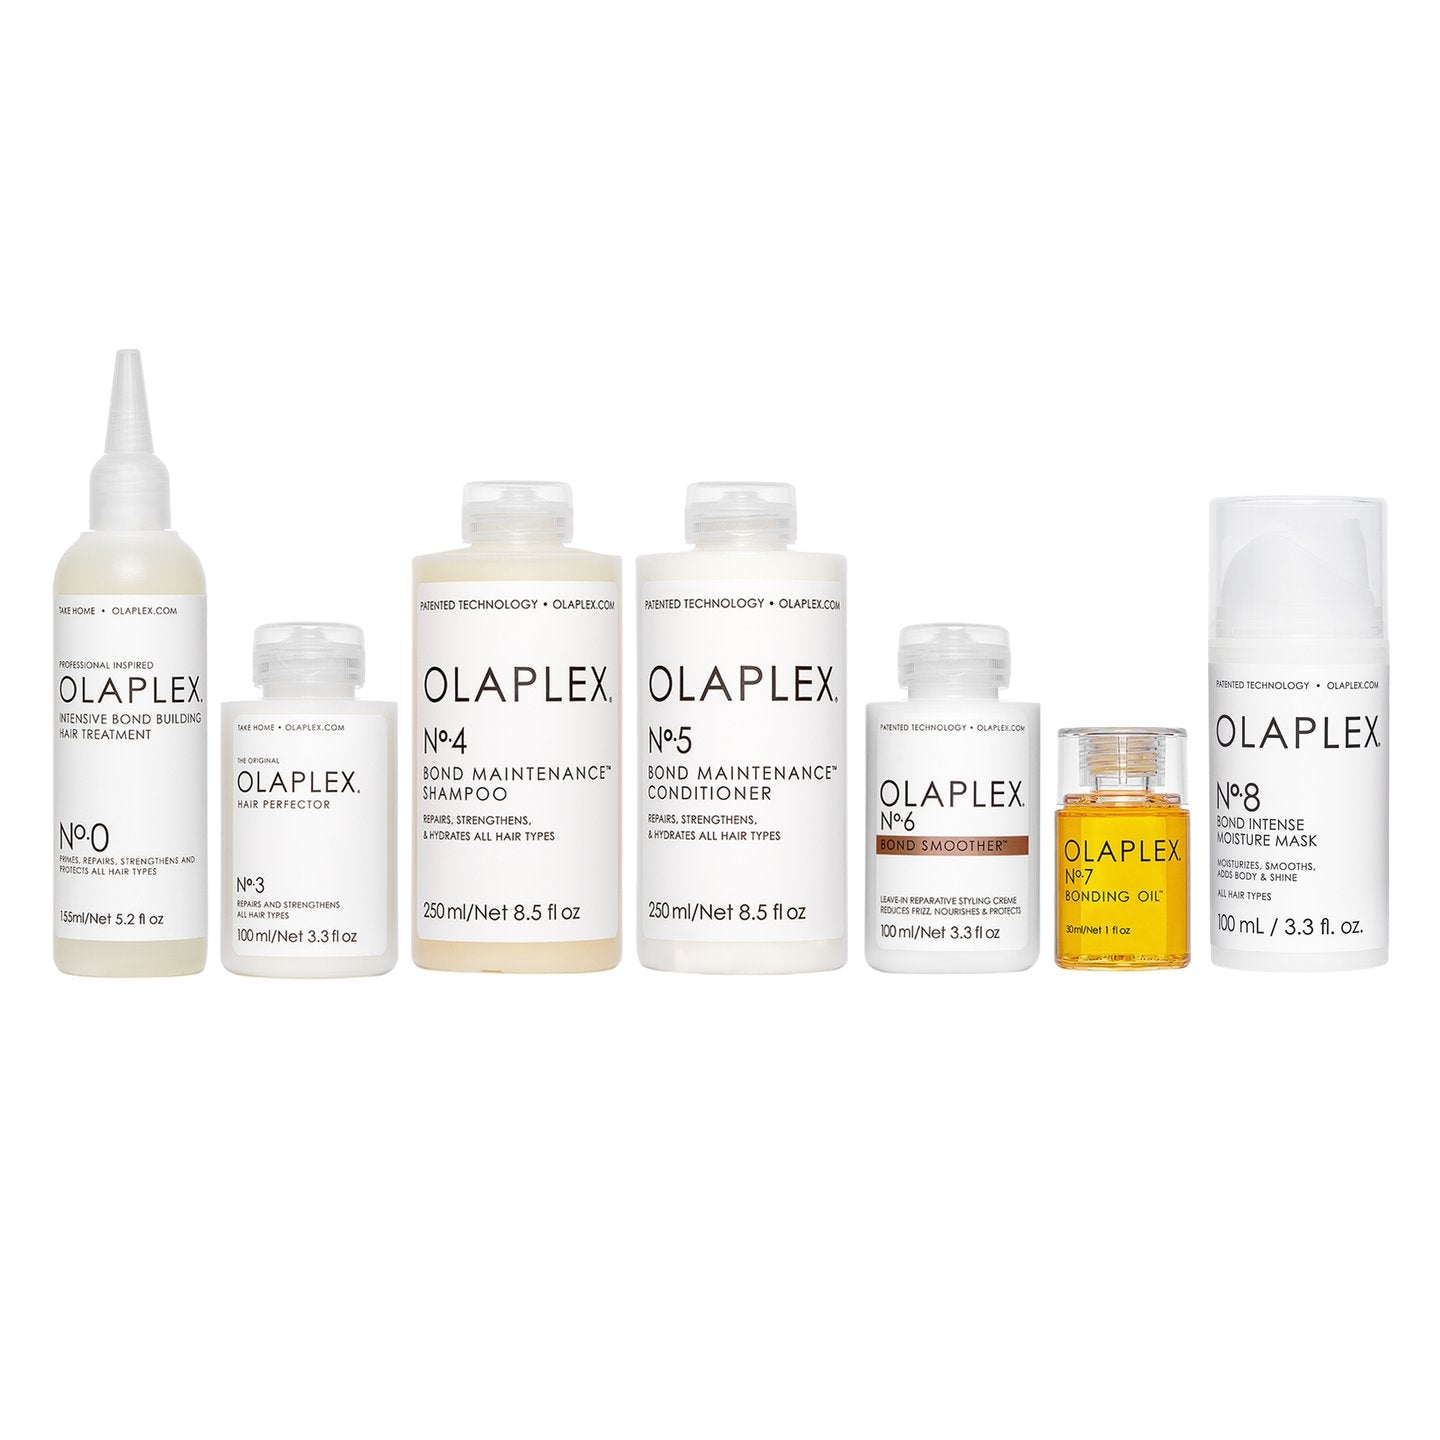 Olaplex Complete Hair Repair System - shelley and co